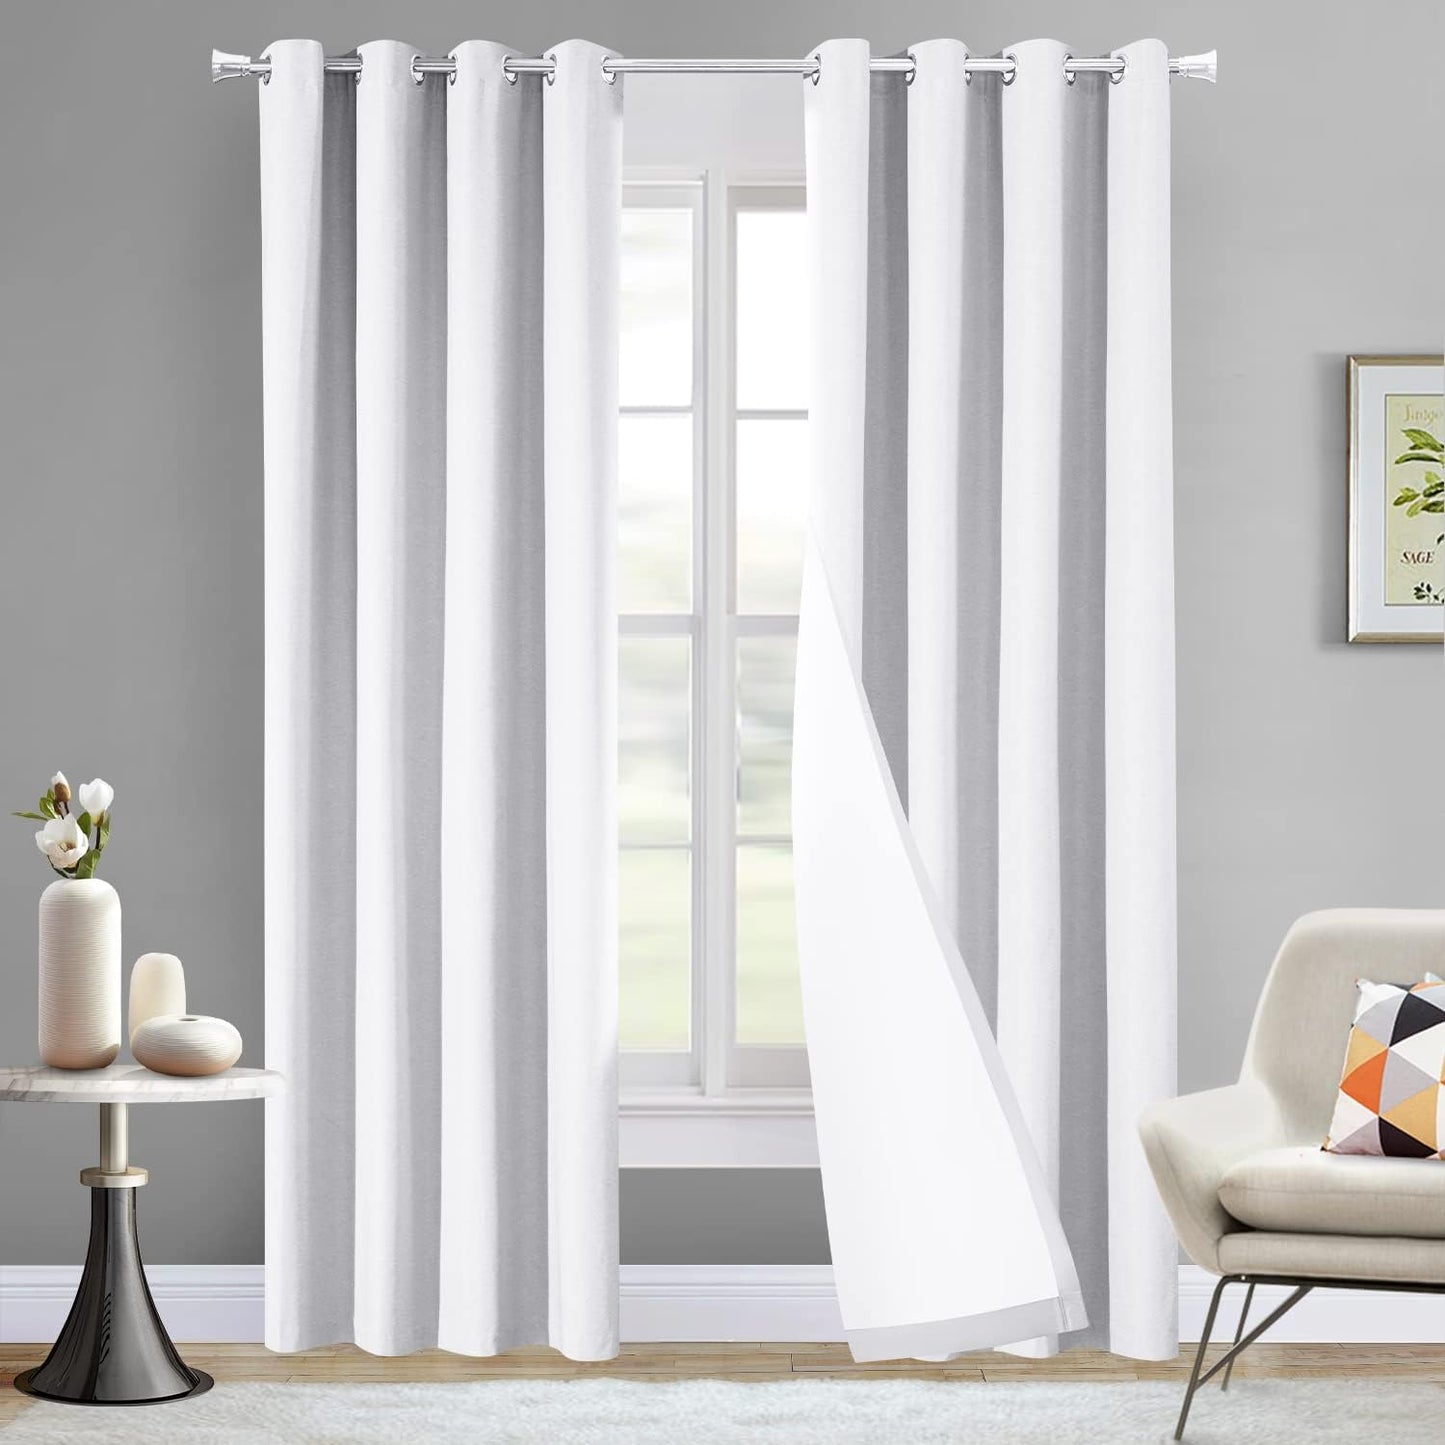 LOYOLADY Dark Grey Blackout Curtains 102 Inches Long 2 Panels Set Thermal Insulated Curtains for Living Room Grommet Noise Reduce Curtains for Bedroom 52" W X 102" L  LoyoLady Home Textiles Pure White 100 Blackout Curtains, Grommet 2 X ( 72" W X 84" L ) 